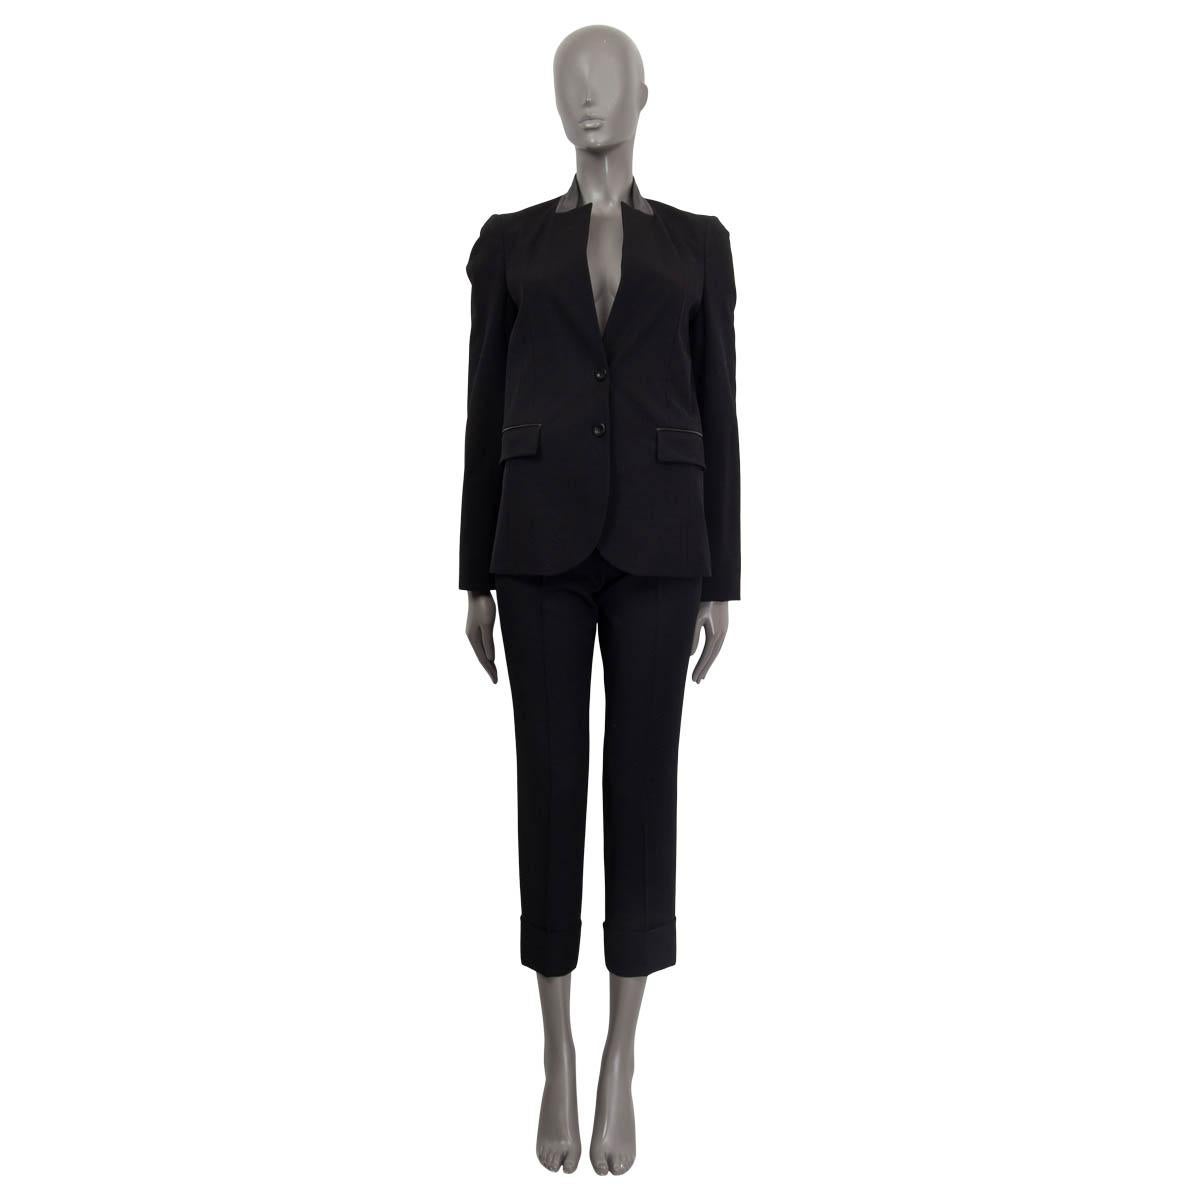 
100% authentic Gucci buttoned long sleeve blazer in black wool (97%) and elastane (3%). Comes with a leather (100%) collar and a fine line at the front flap pockets (sewn shut). Has buttoned cuffs and opens with two Gucci buttons on the front.